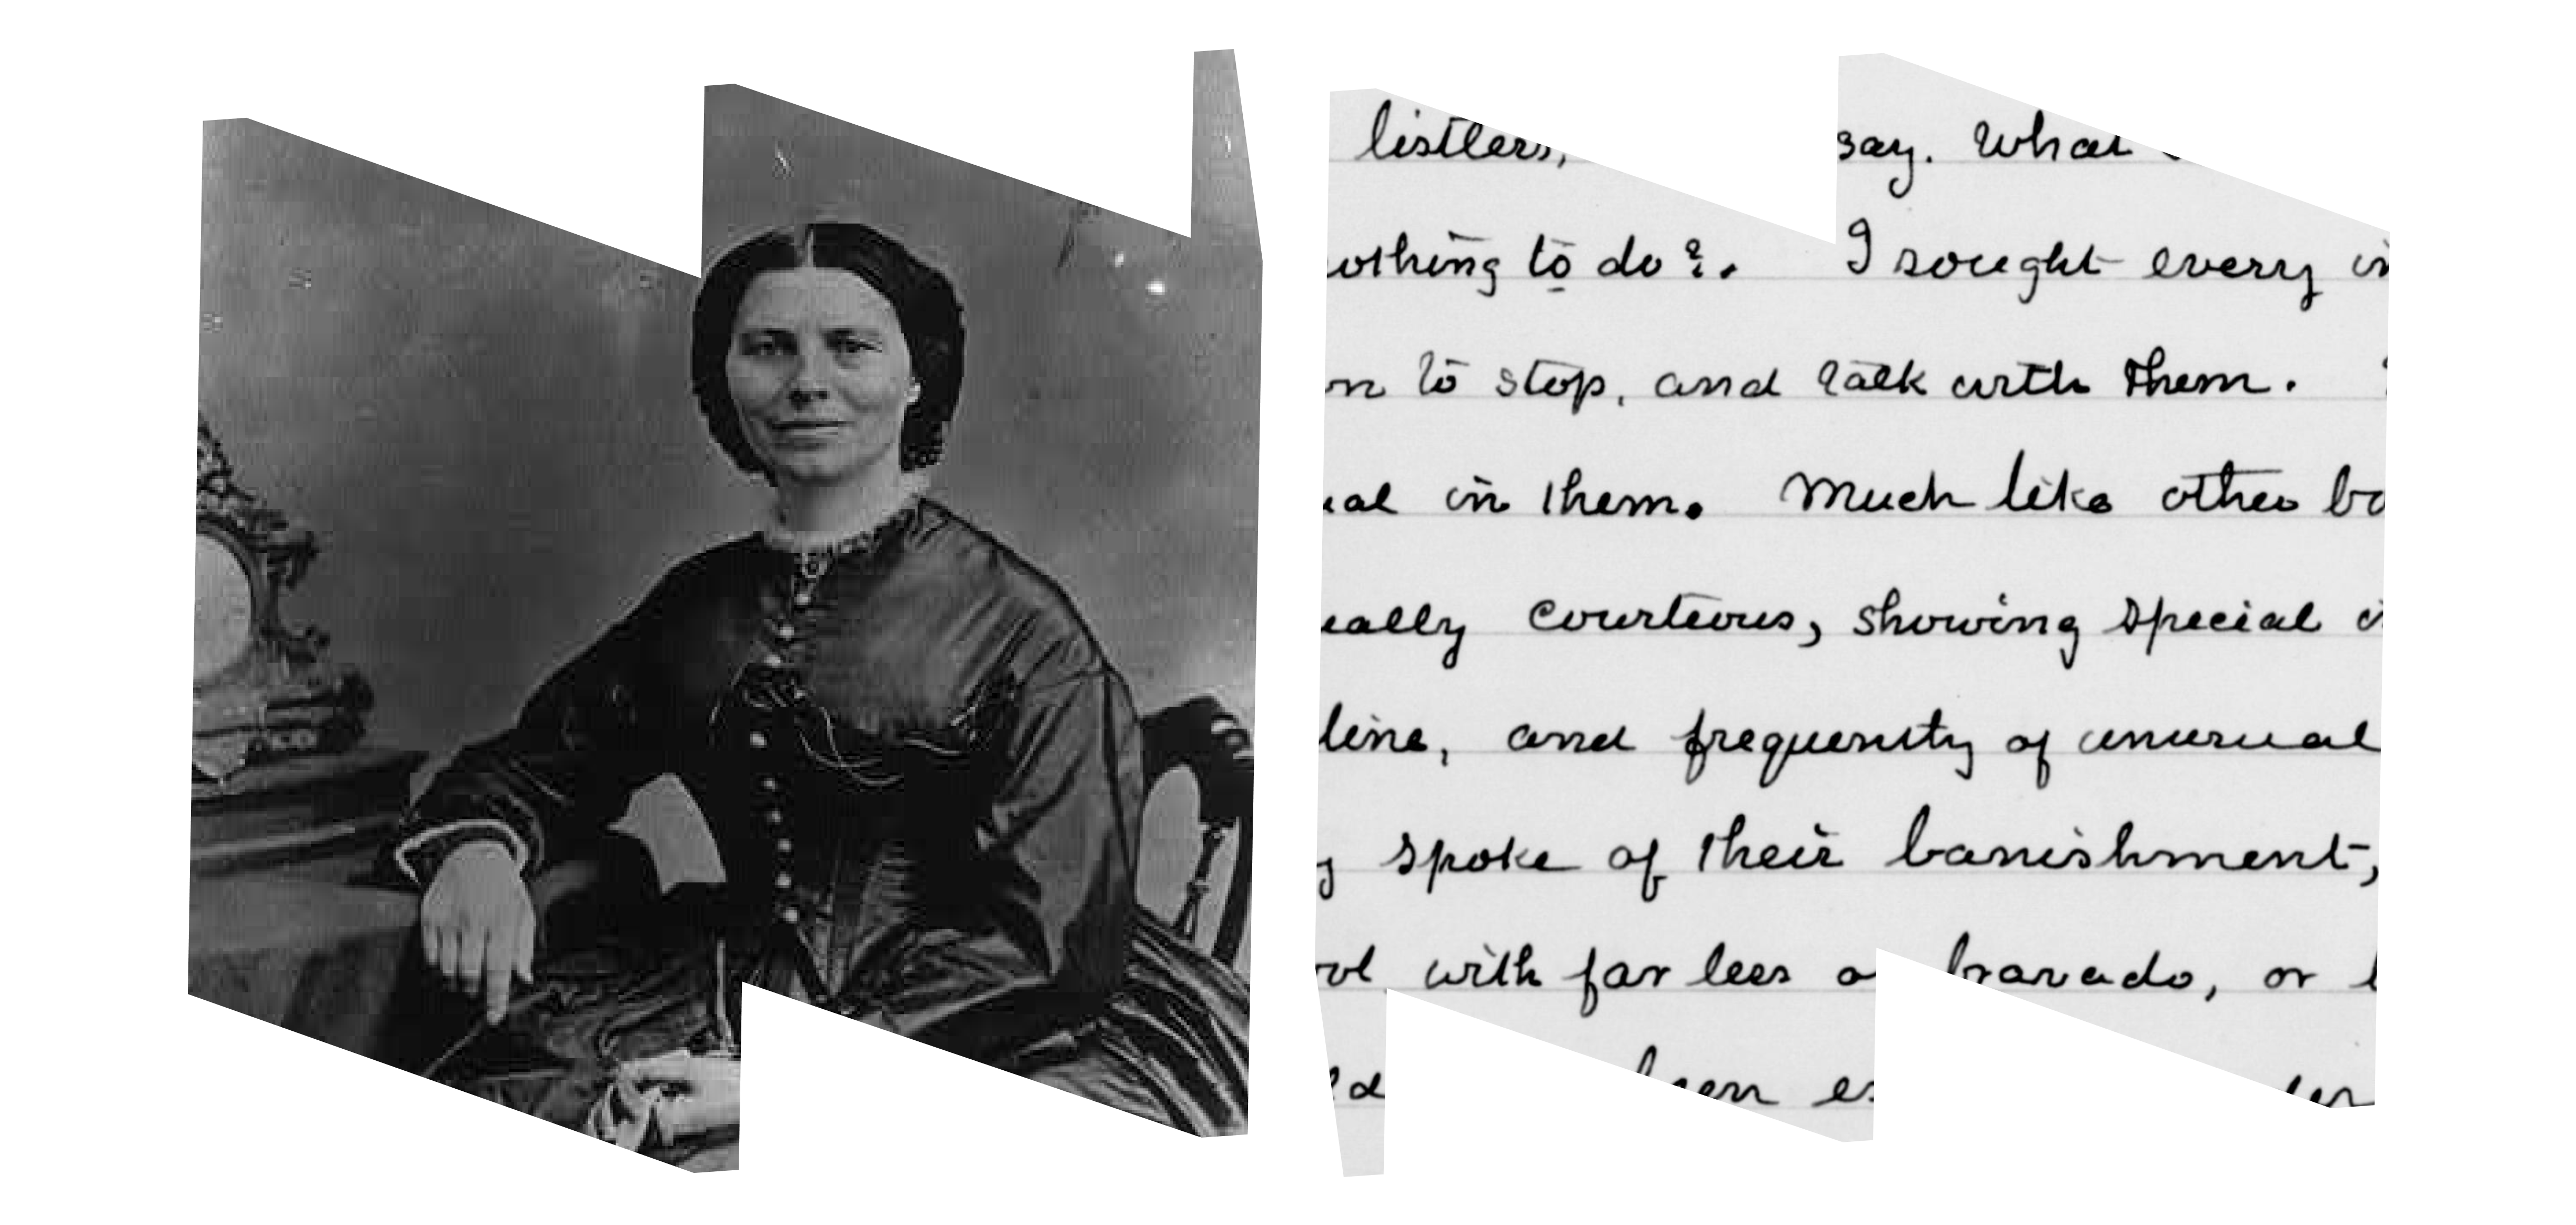 In left "W" frame, a black and white image of Clara Barton, seated. In right "W" frame, Clara's writing in cursive.